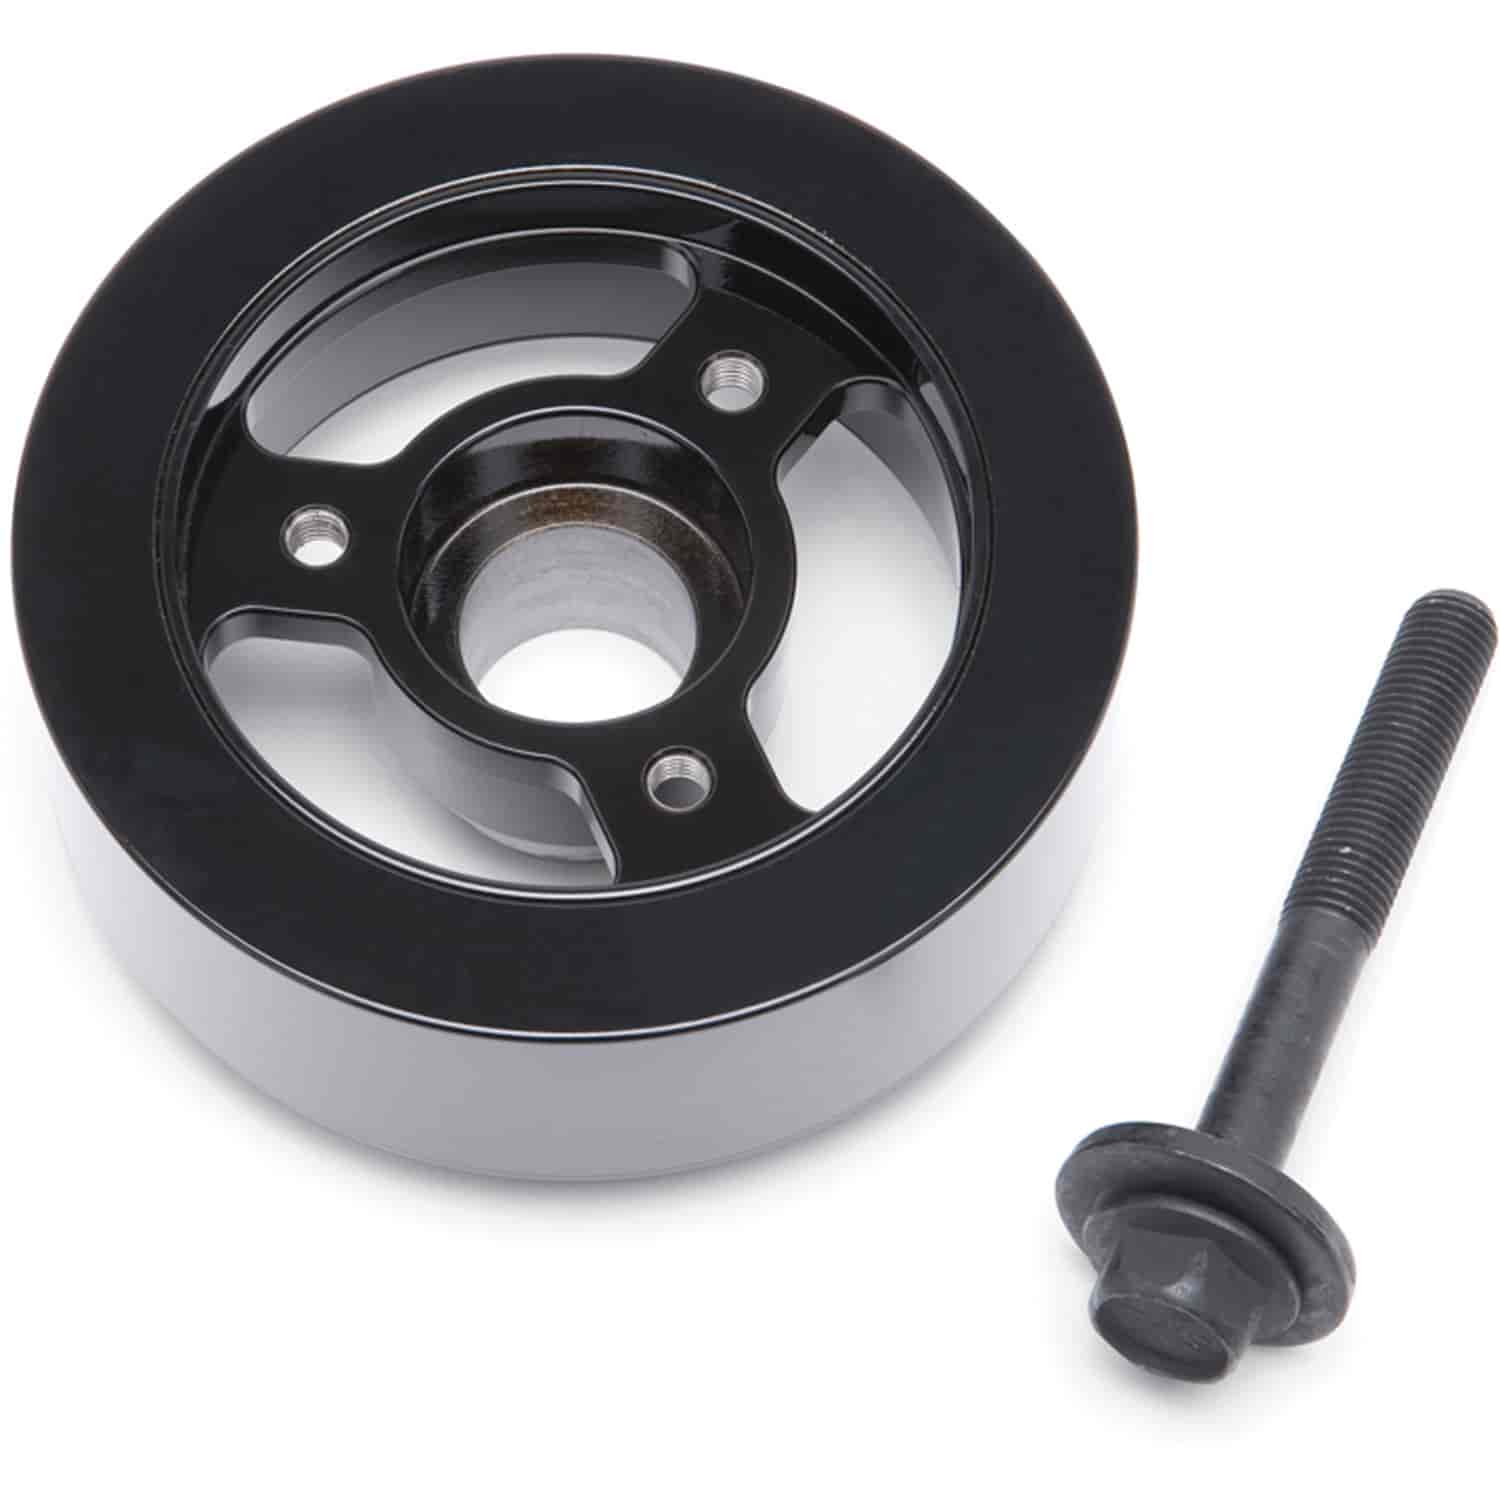 E-Force Replacement Harmonic Damper for Dry Sump C7 Corvette